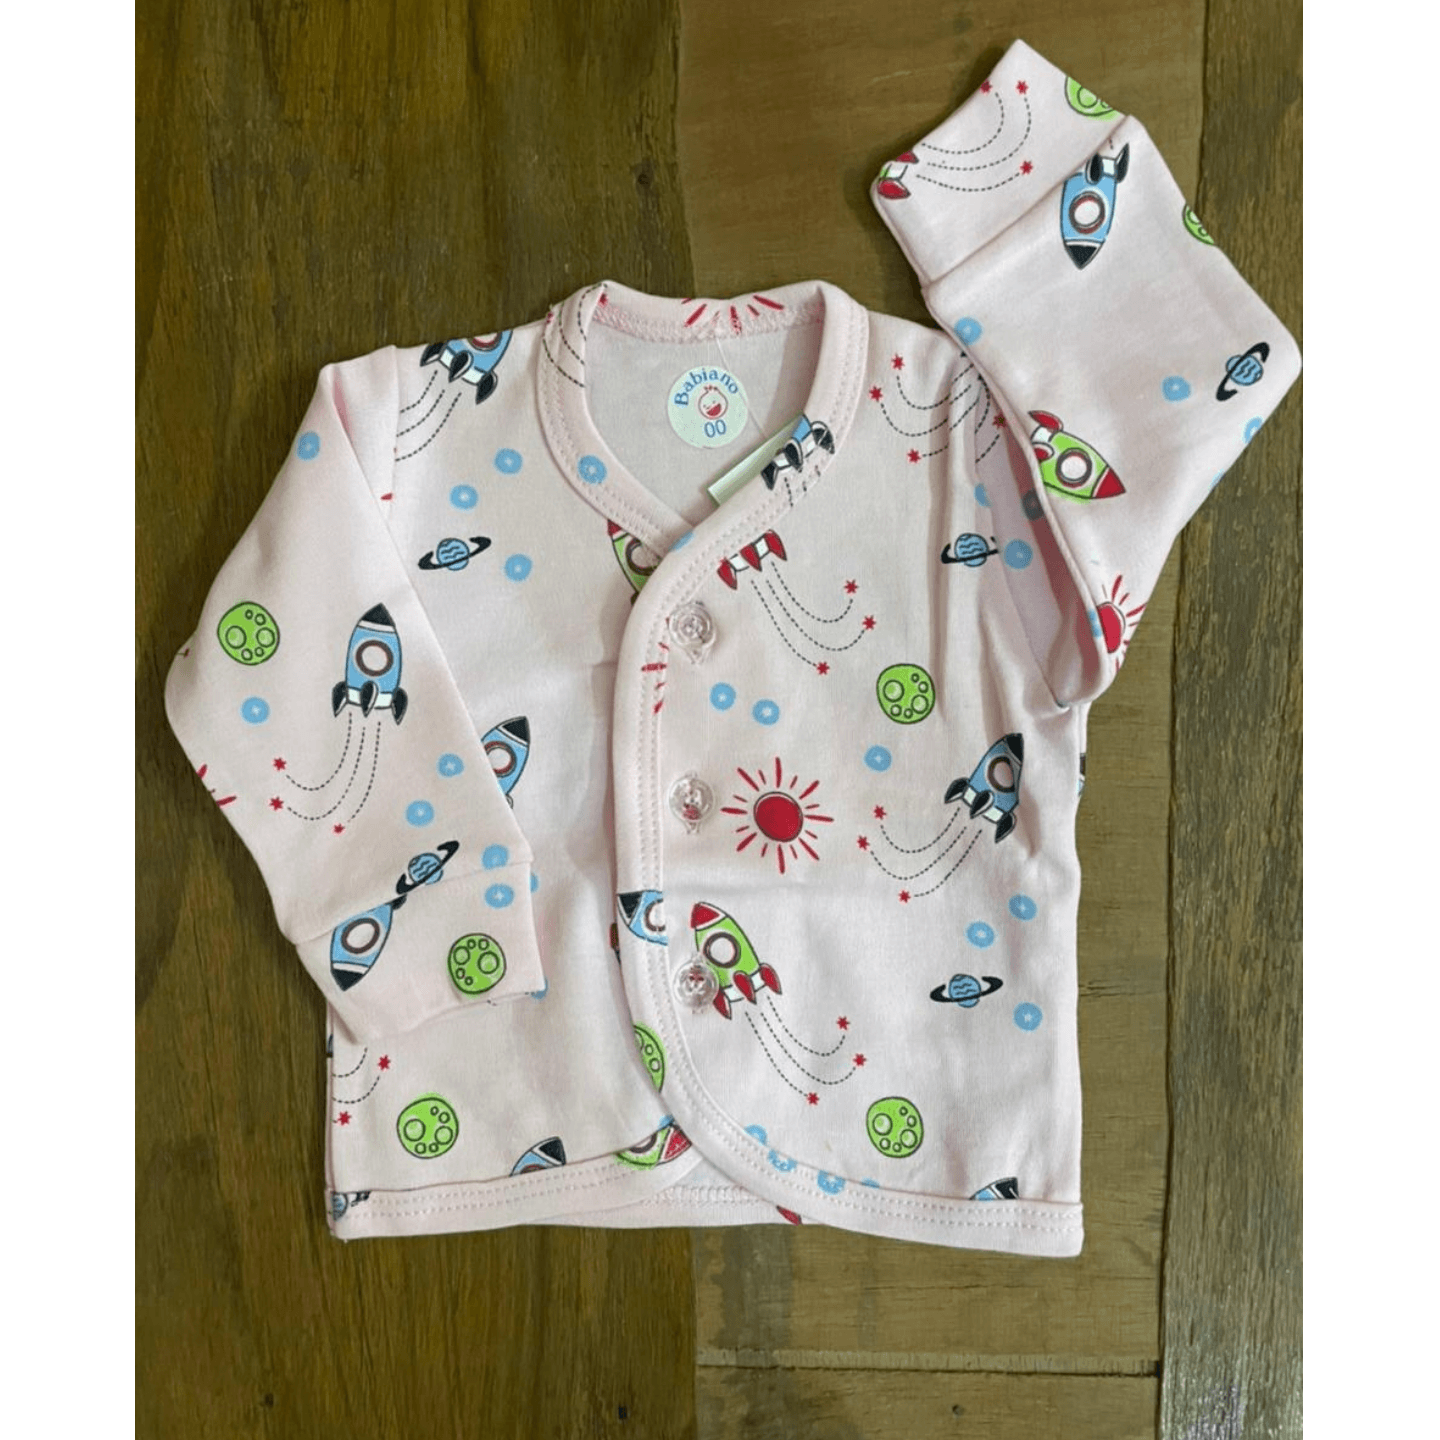 Babiano Full Sleeves Top Rs 170 Only Pre Mature Size Newborn Premie